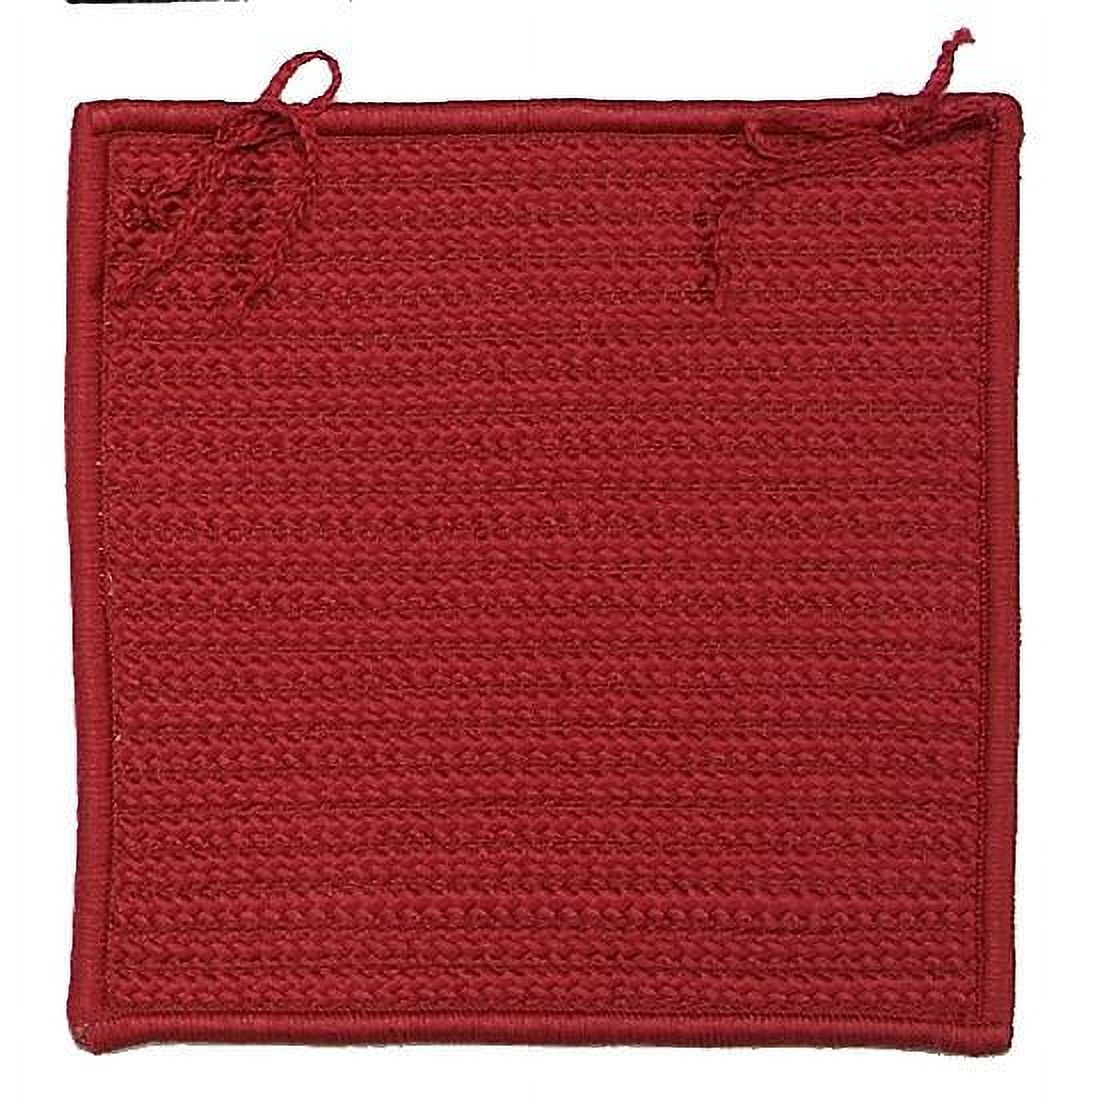 Colonial Mills 2' x 5' Maroon Red Rectangular Braided Stair Tread Rug' - image 5 of 6